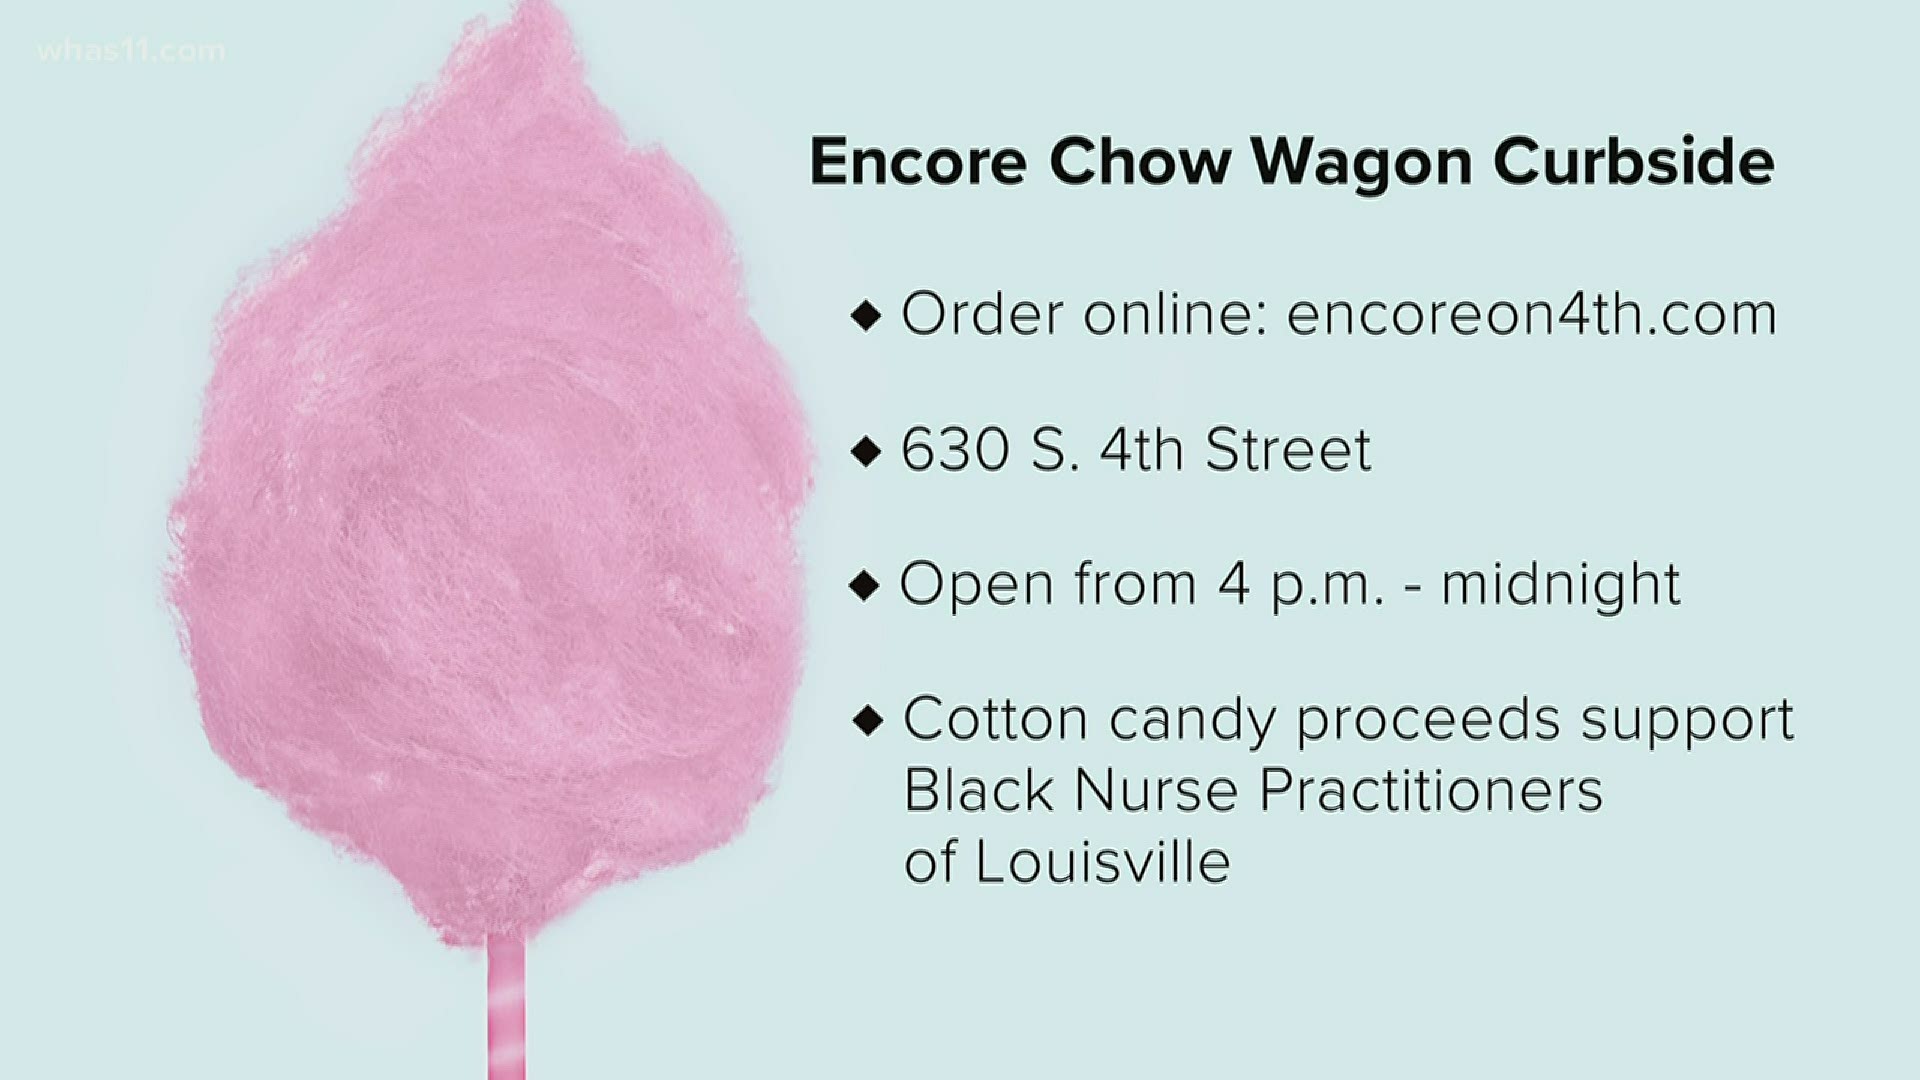 The downtown Louisville restaurant's chow wagon will feature carnival style food staples, customers can order online for pick-up.